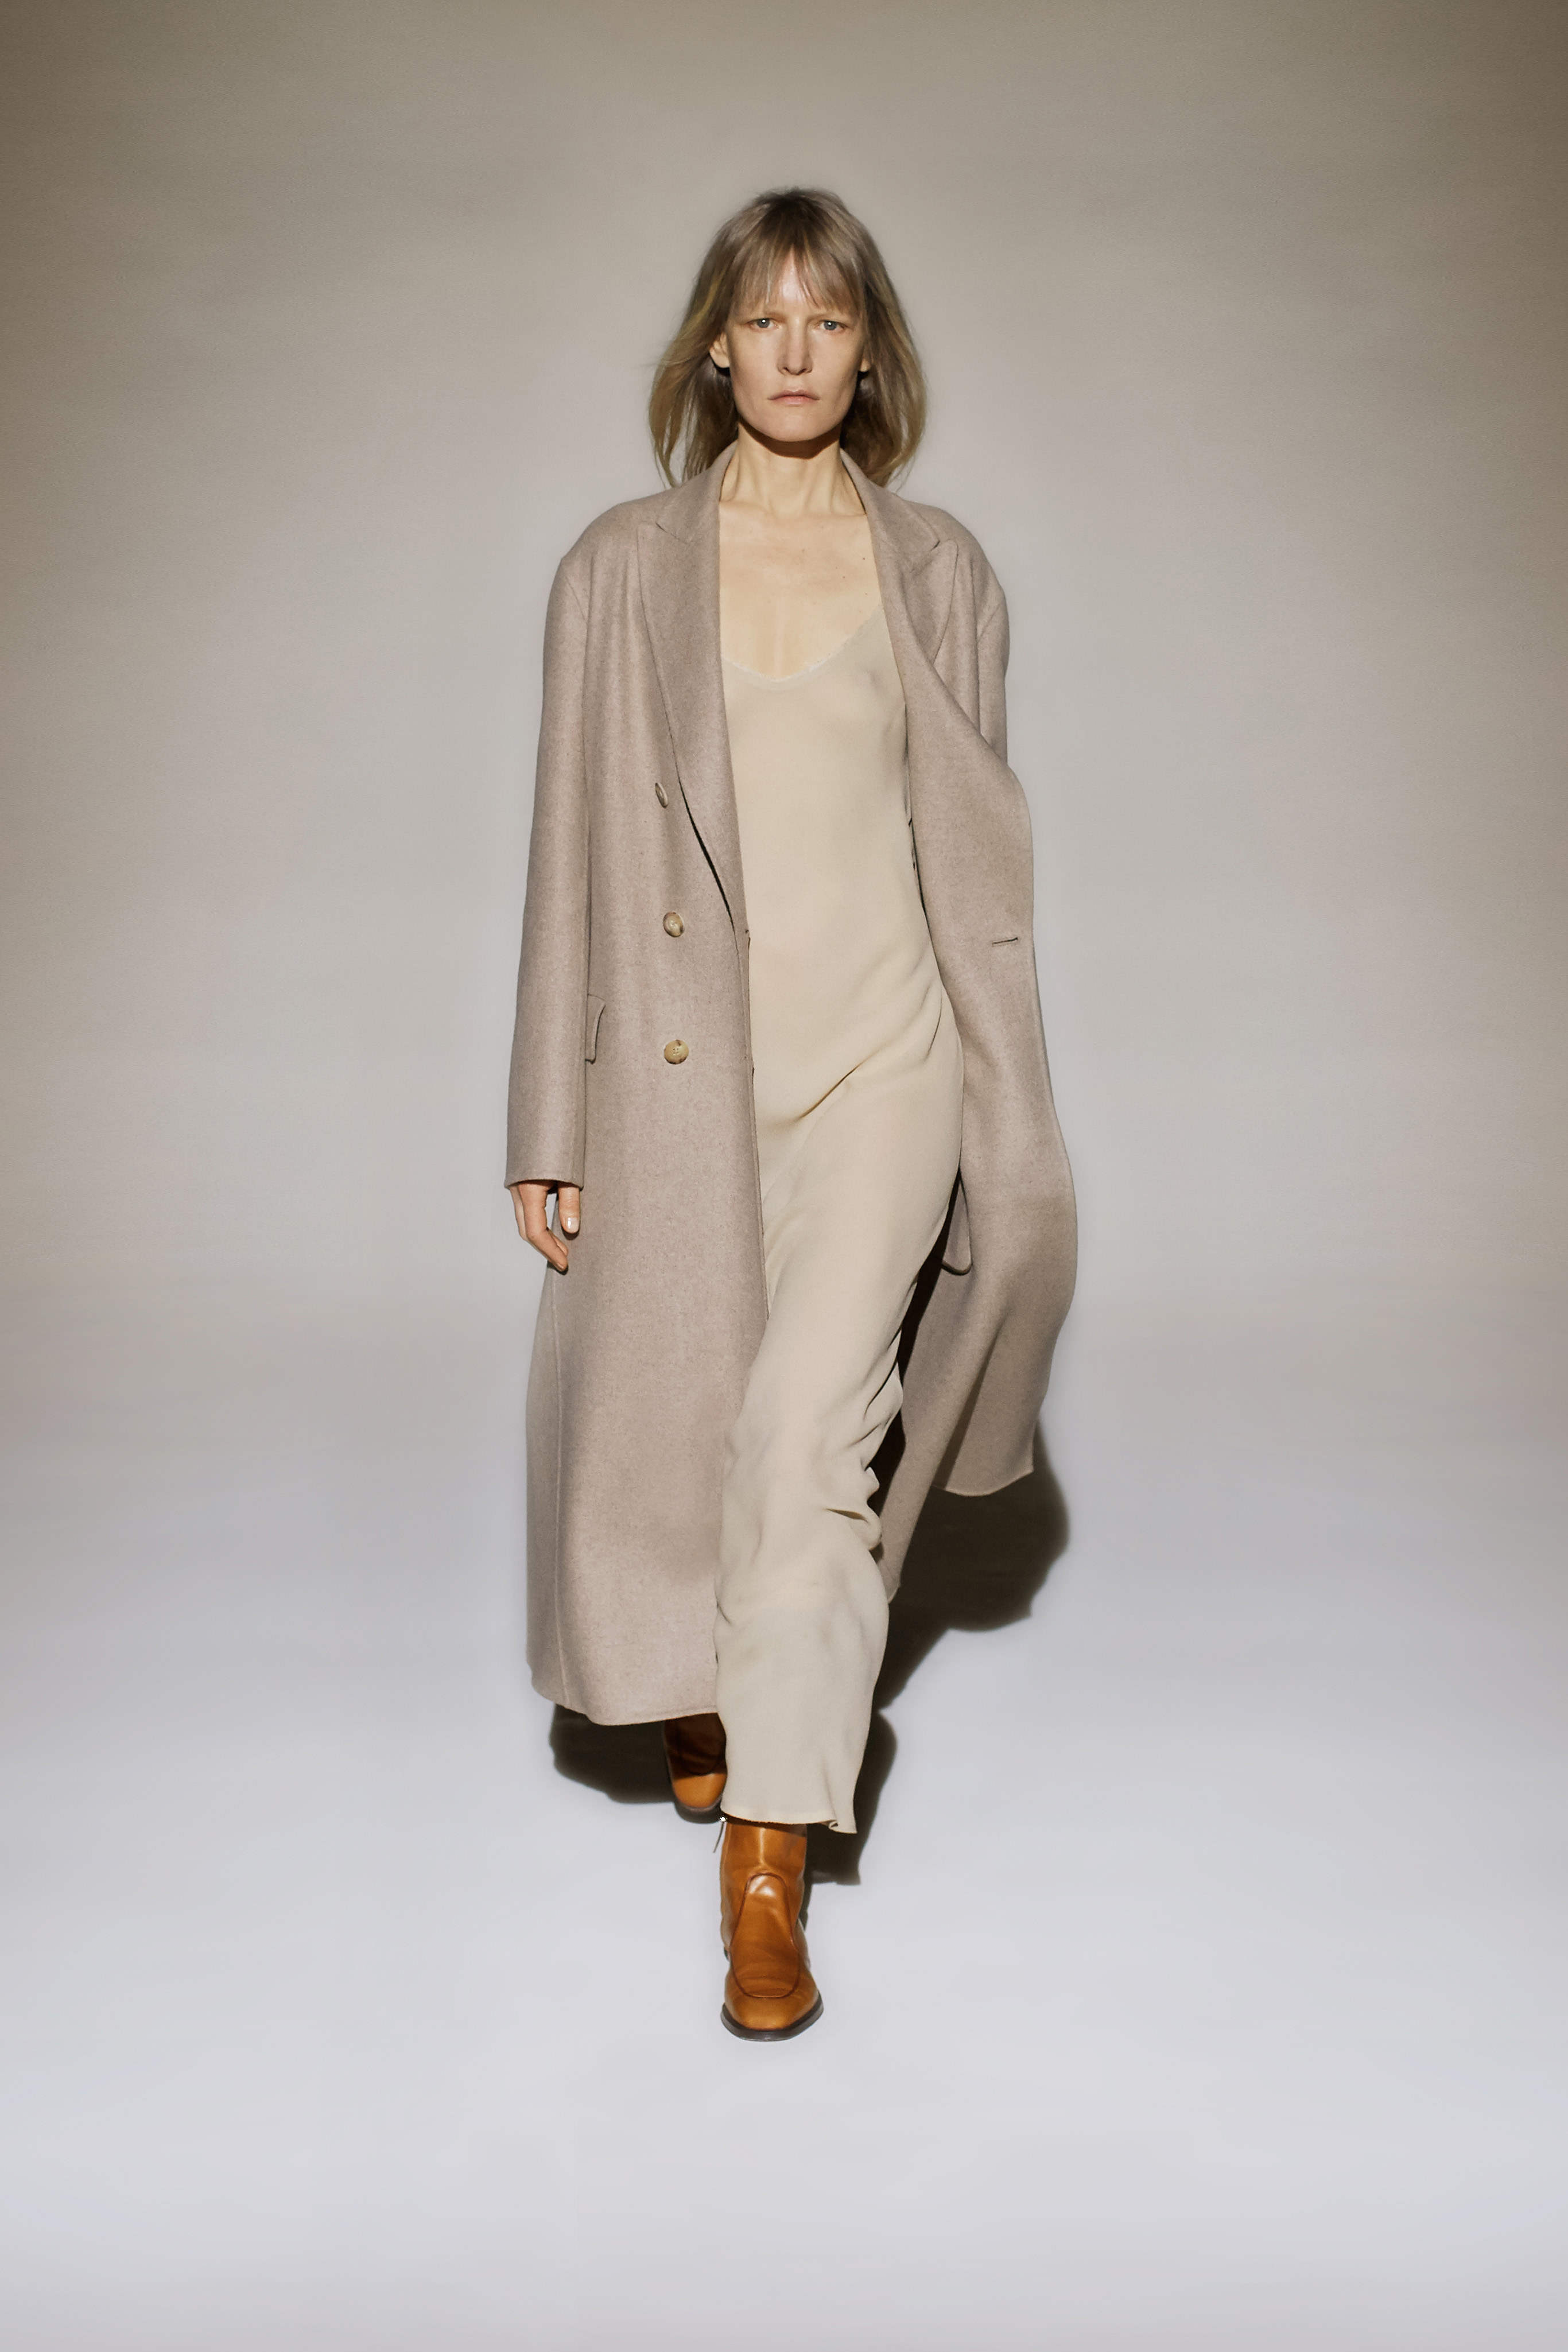 Trini |The Row Fall Winter 2016 Collection